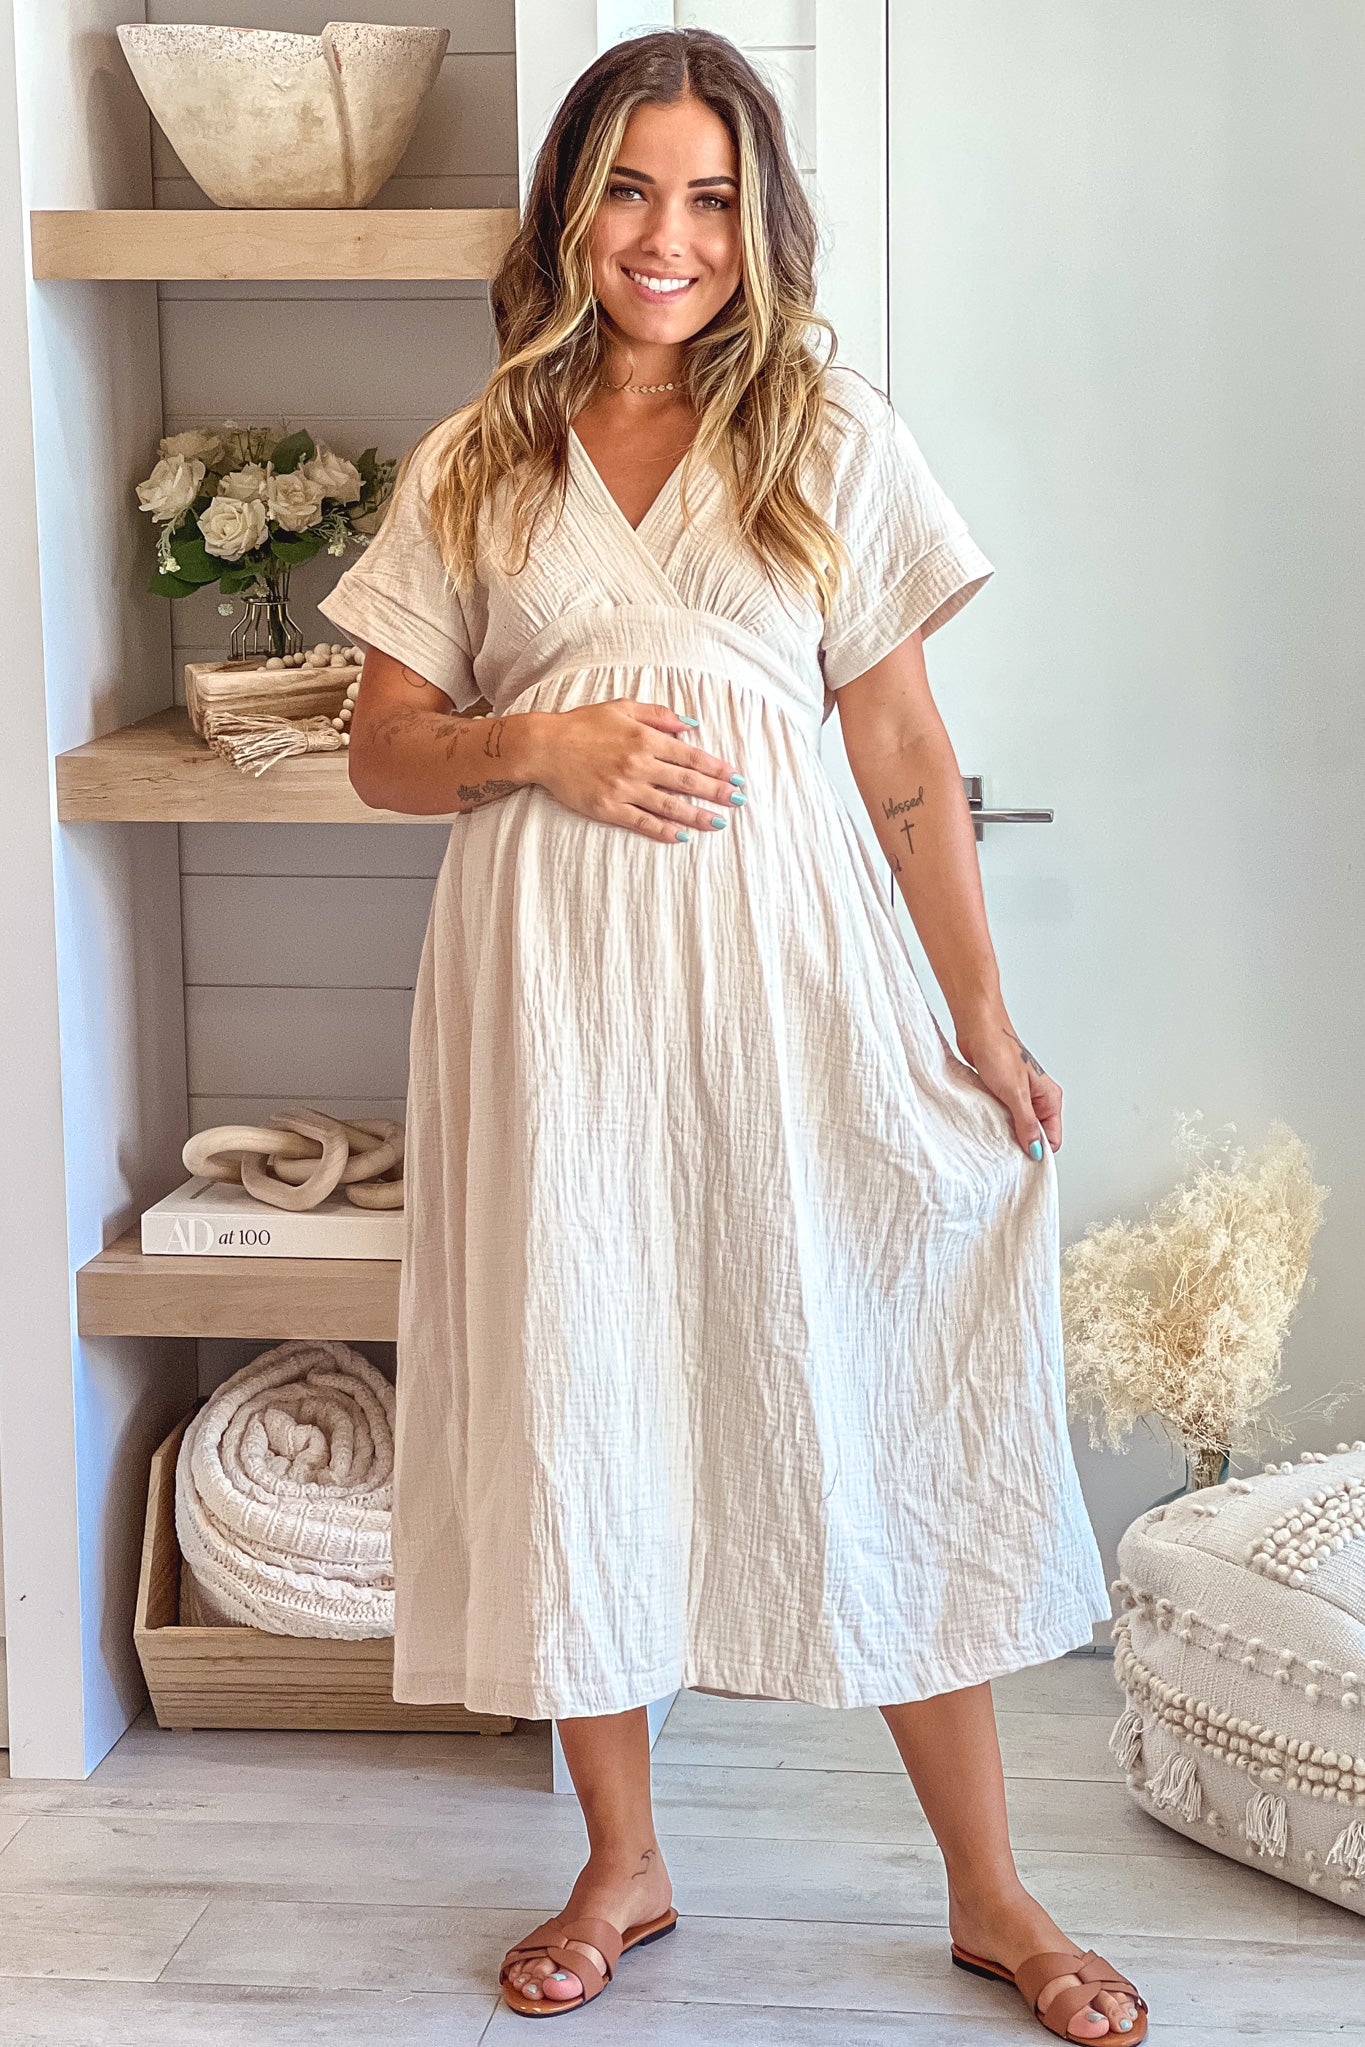 maternity clothes